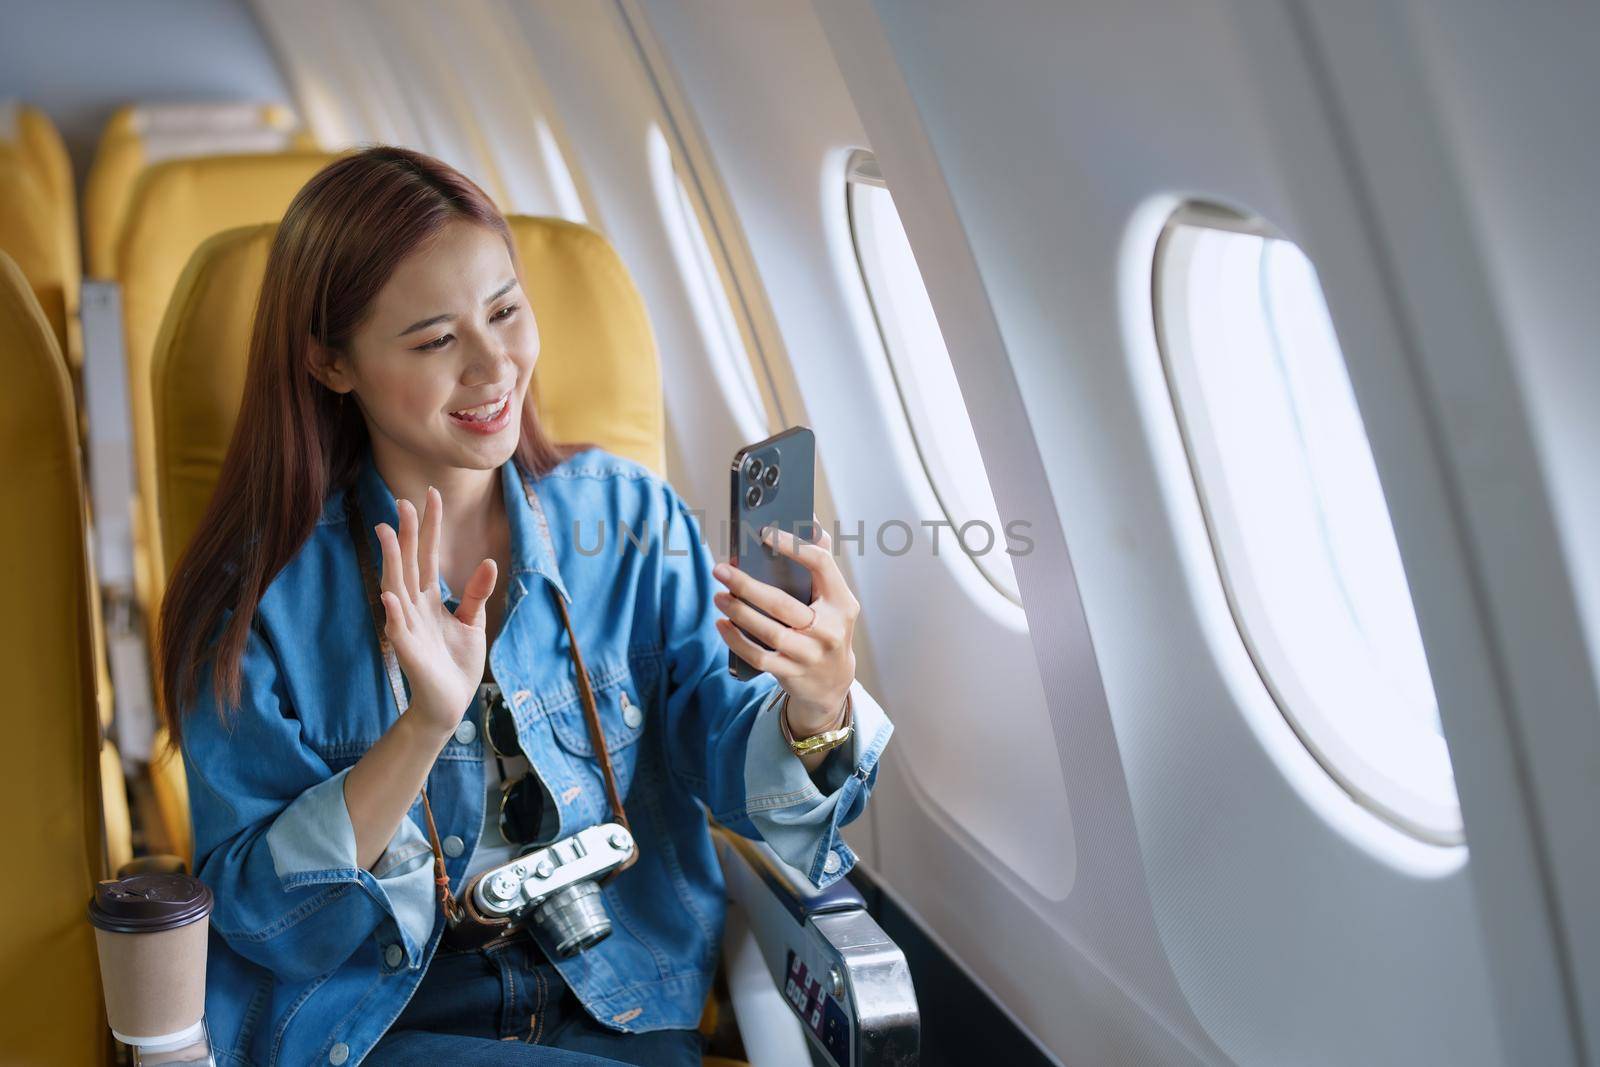 Travel, tourism business, portrait of a woman using her phone selfie on an airplane to post a profile picture of herself by Manastrong